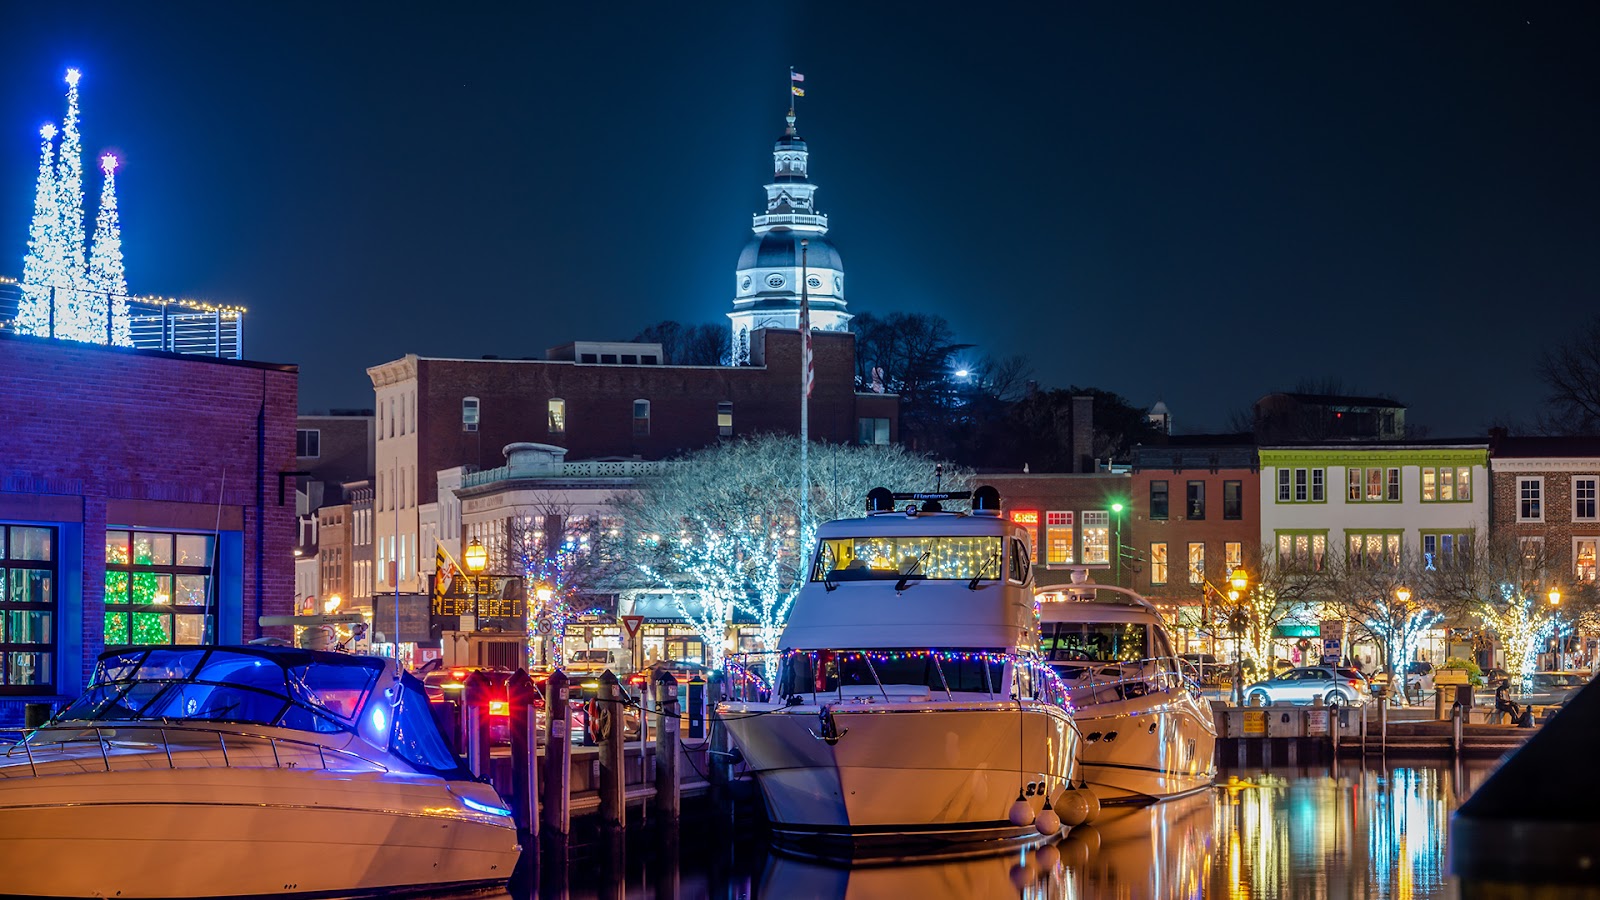 Harbor view in Annapolis, Maryland illuminated with Christmas lights at night